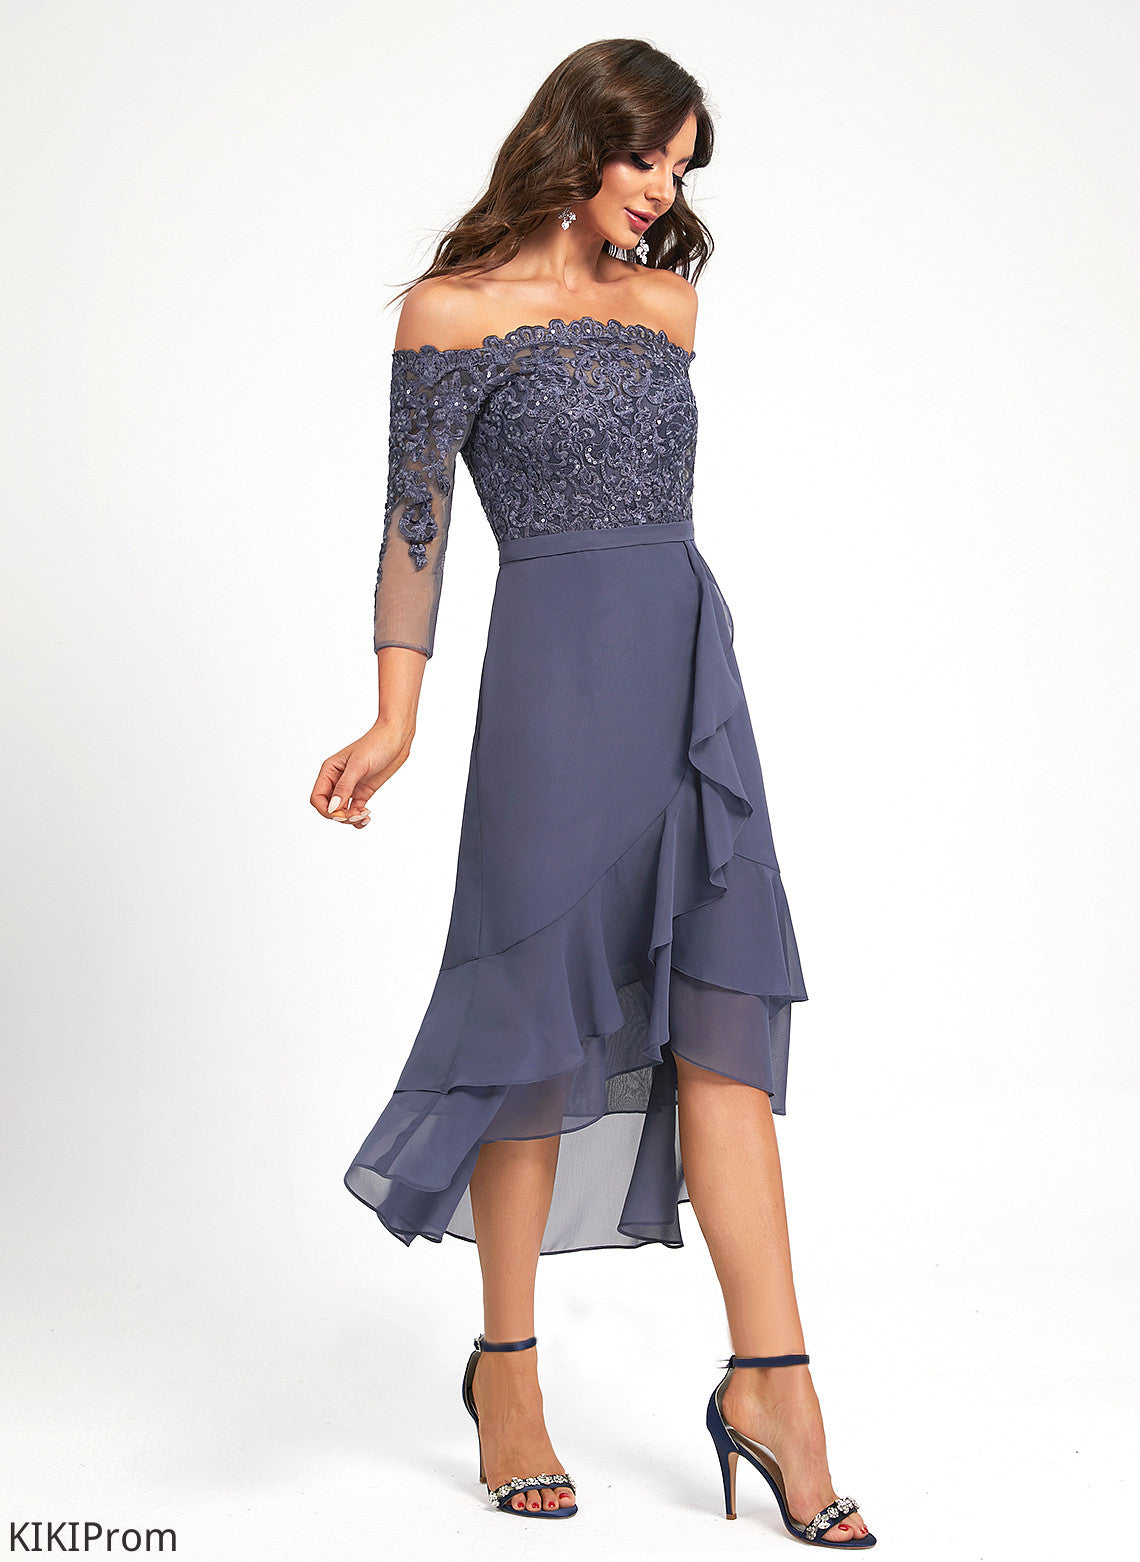 Chiffon Trumpet/Mermaid Asymmetrical Sequins Cocktail Dresses With Dress Cocktail Delaney Off-the-Shoulder